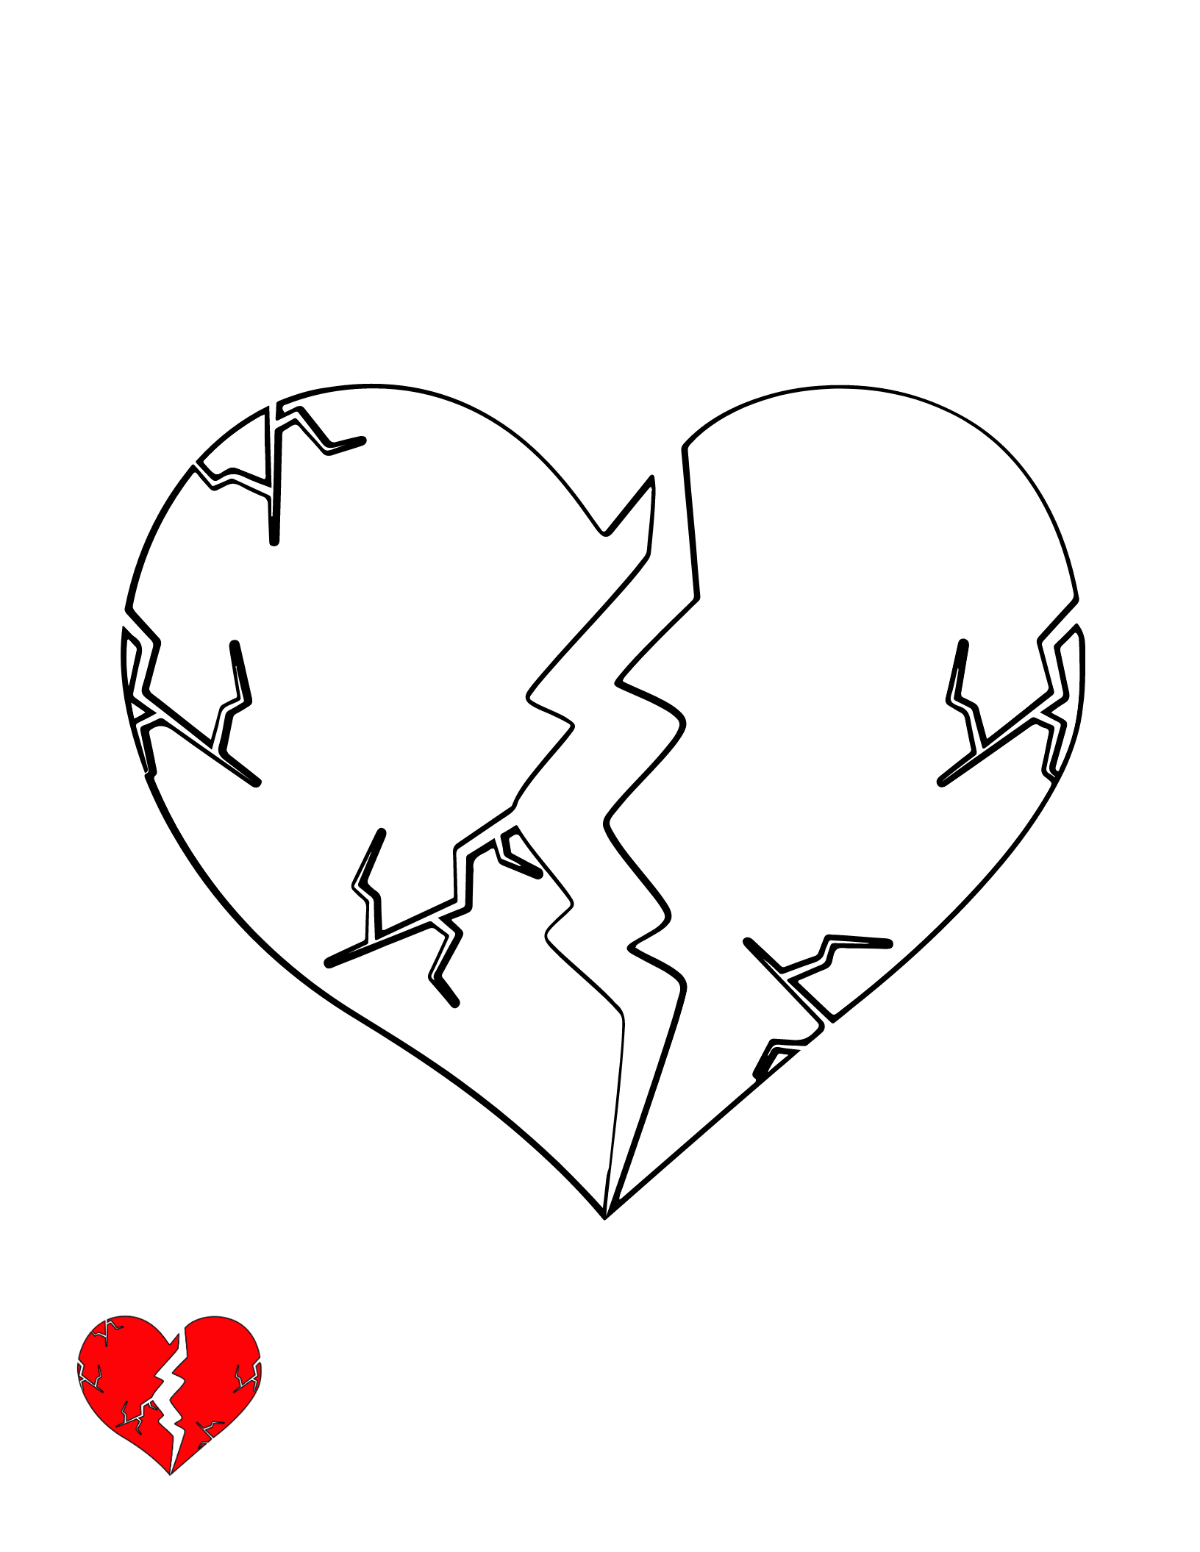 Broken Heart Coloring Page Template